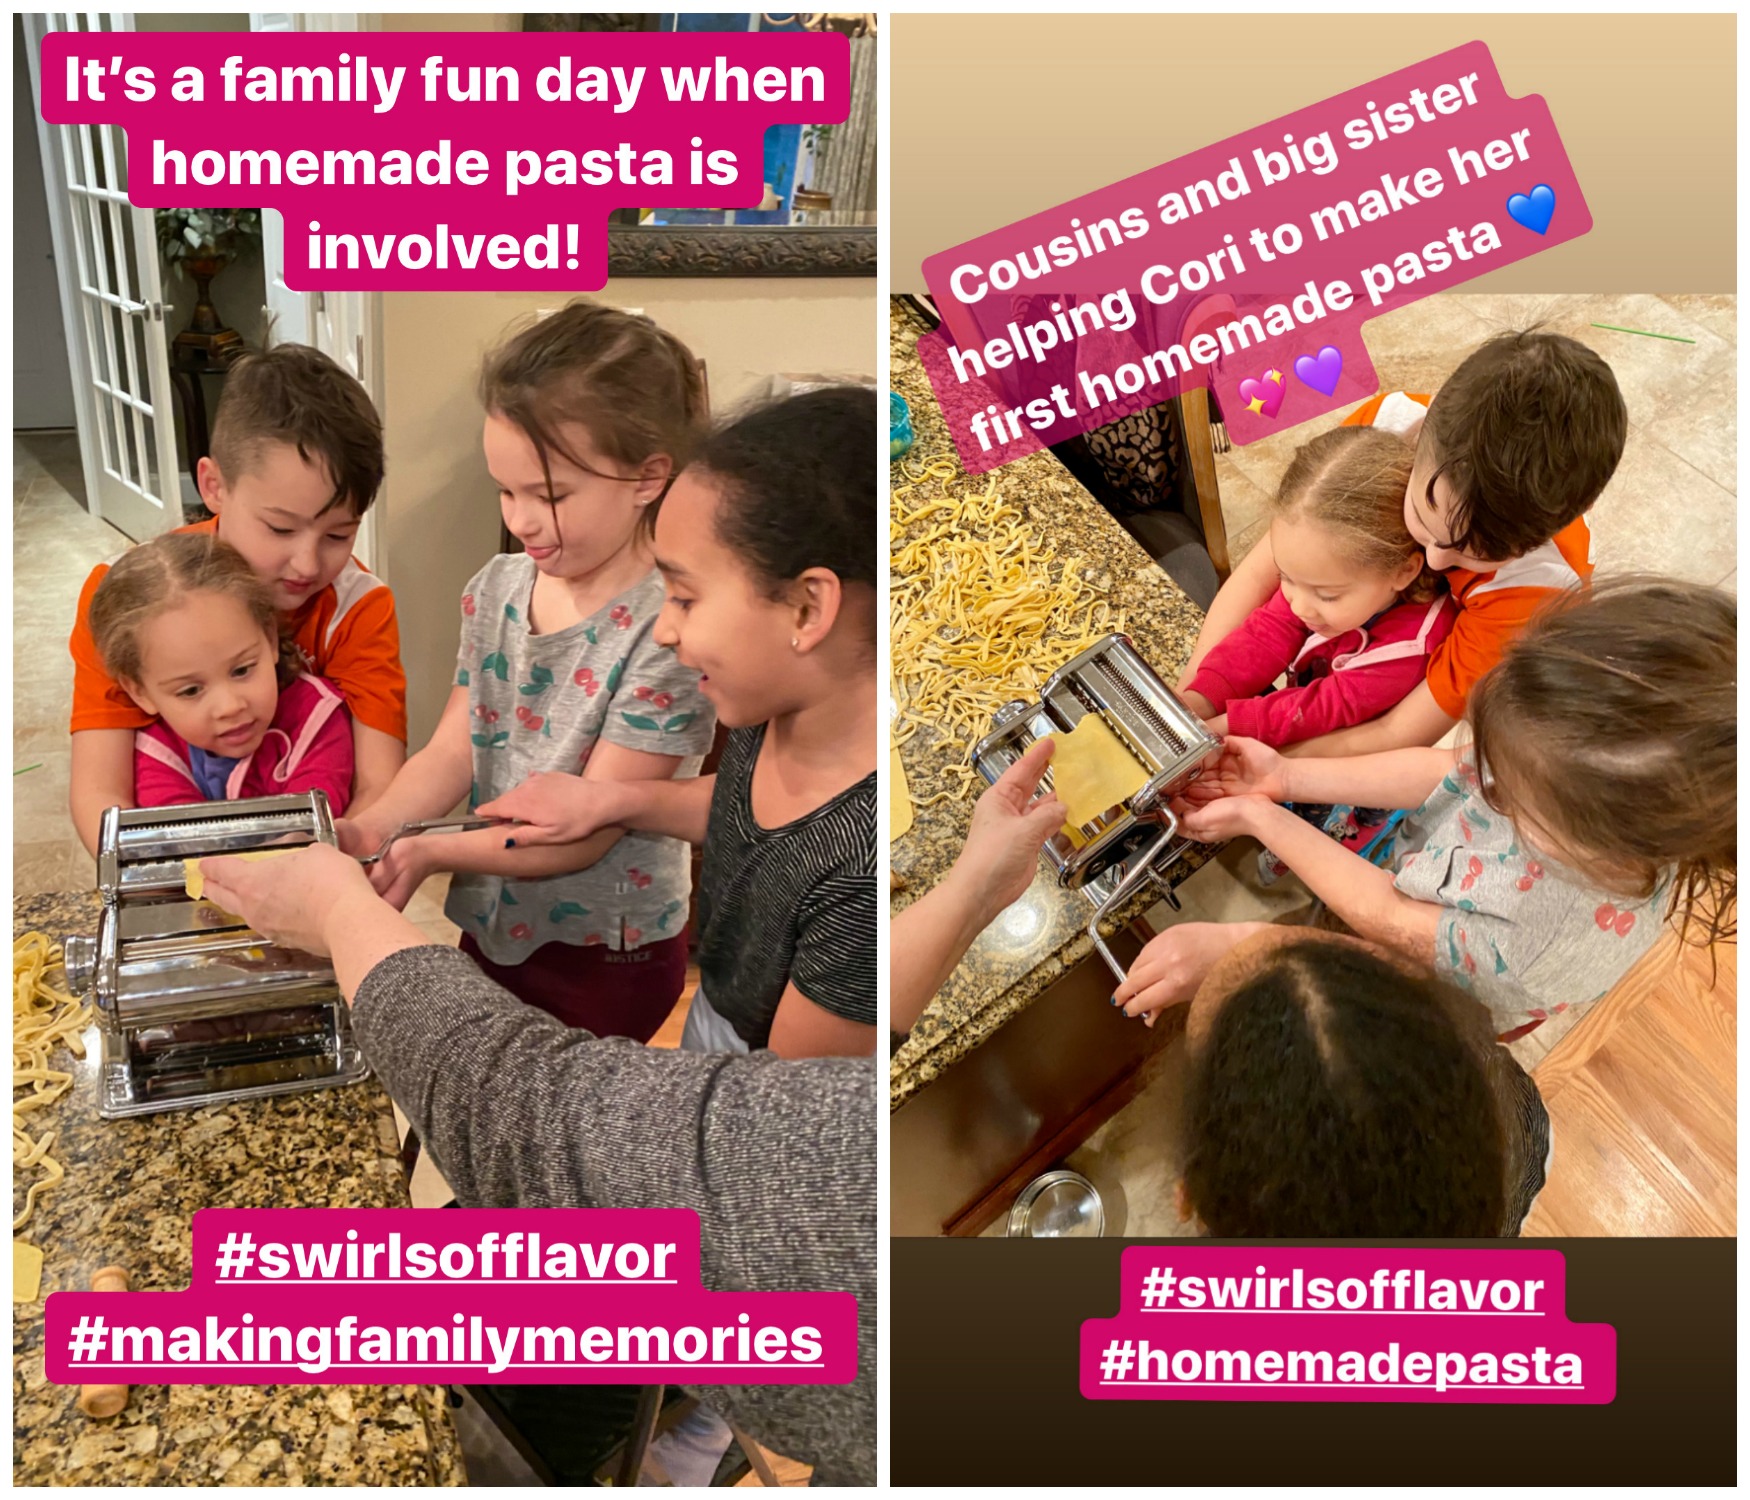 Cousins and big sister helping Cori to make her first homemade pasta!